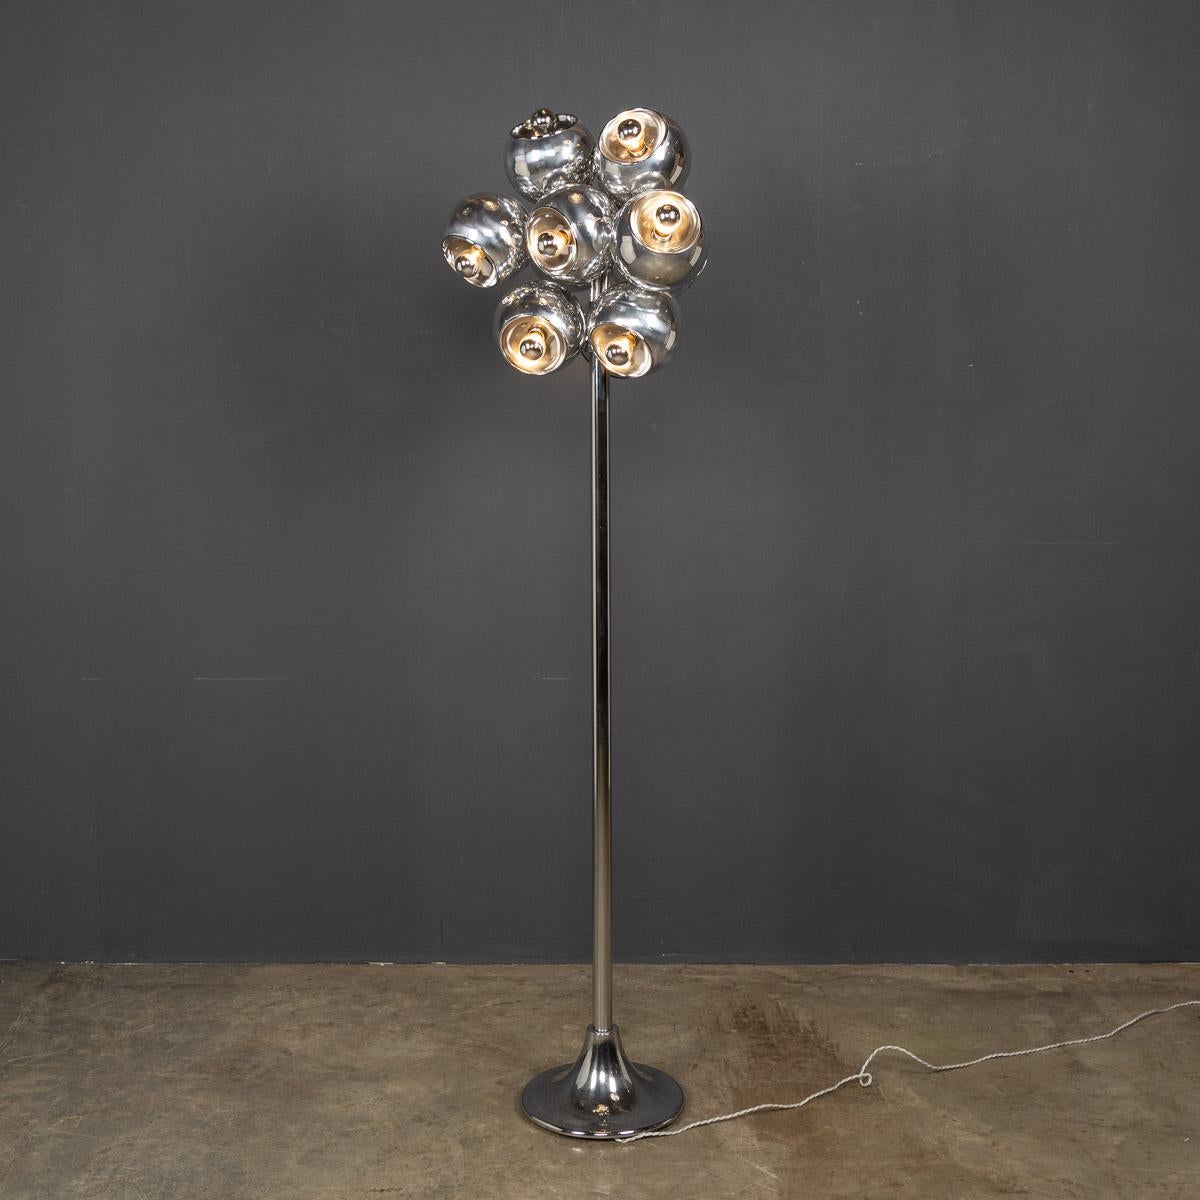 A mid-20th century Italian chrome standing lamp with twelve articulated balls gathered together. An unusual piece of 1960's design.

Condition
In great condition - wear and tear consistent with age.

Size
Height: 176 cm
Width: 60 cm.